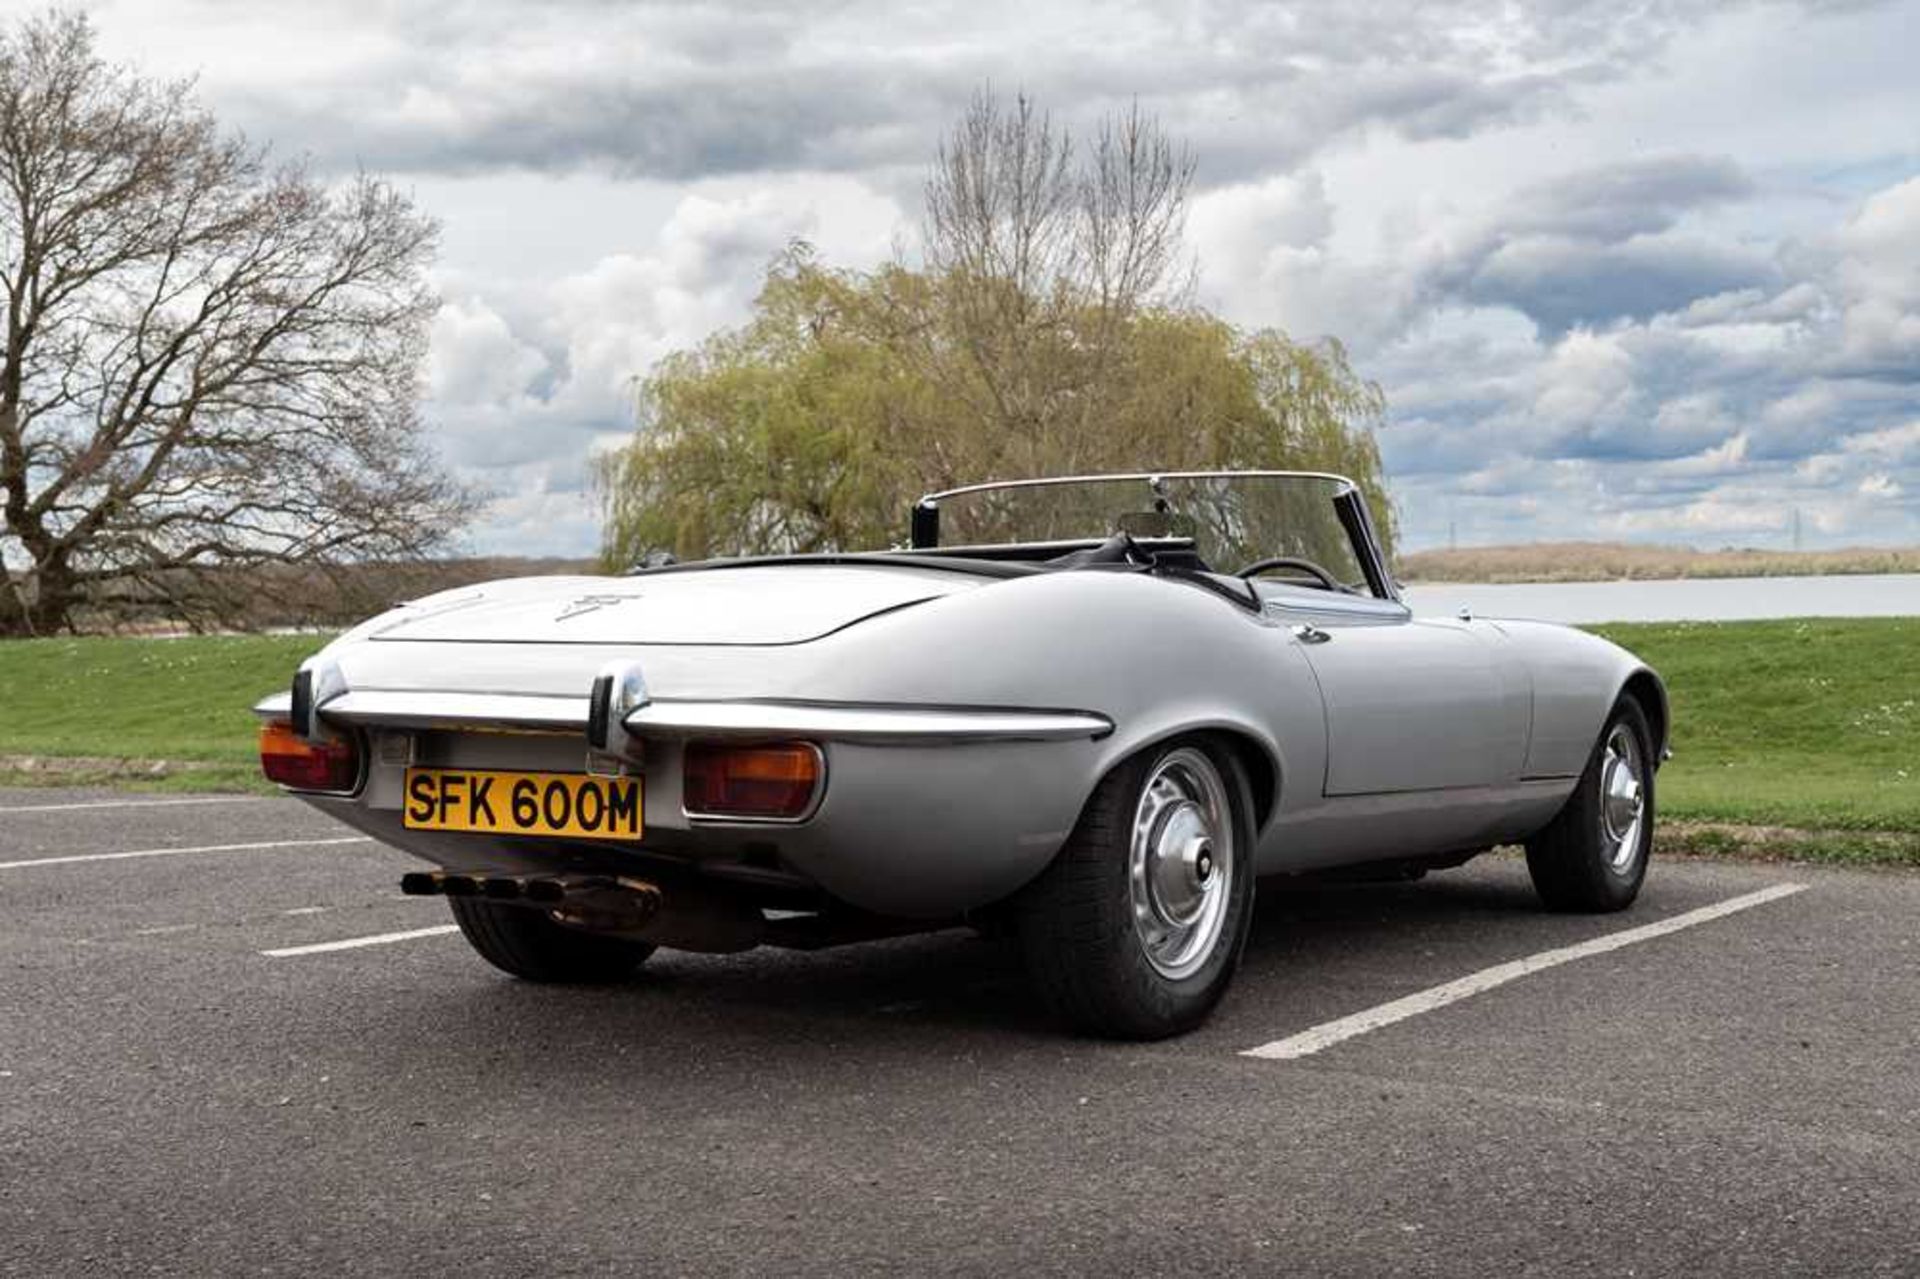 1974 Jaguar E-Type Series III V12 Roadster Only one family owner and 54,412 miles from new - Image 25 of 89